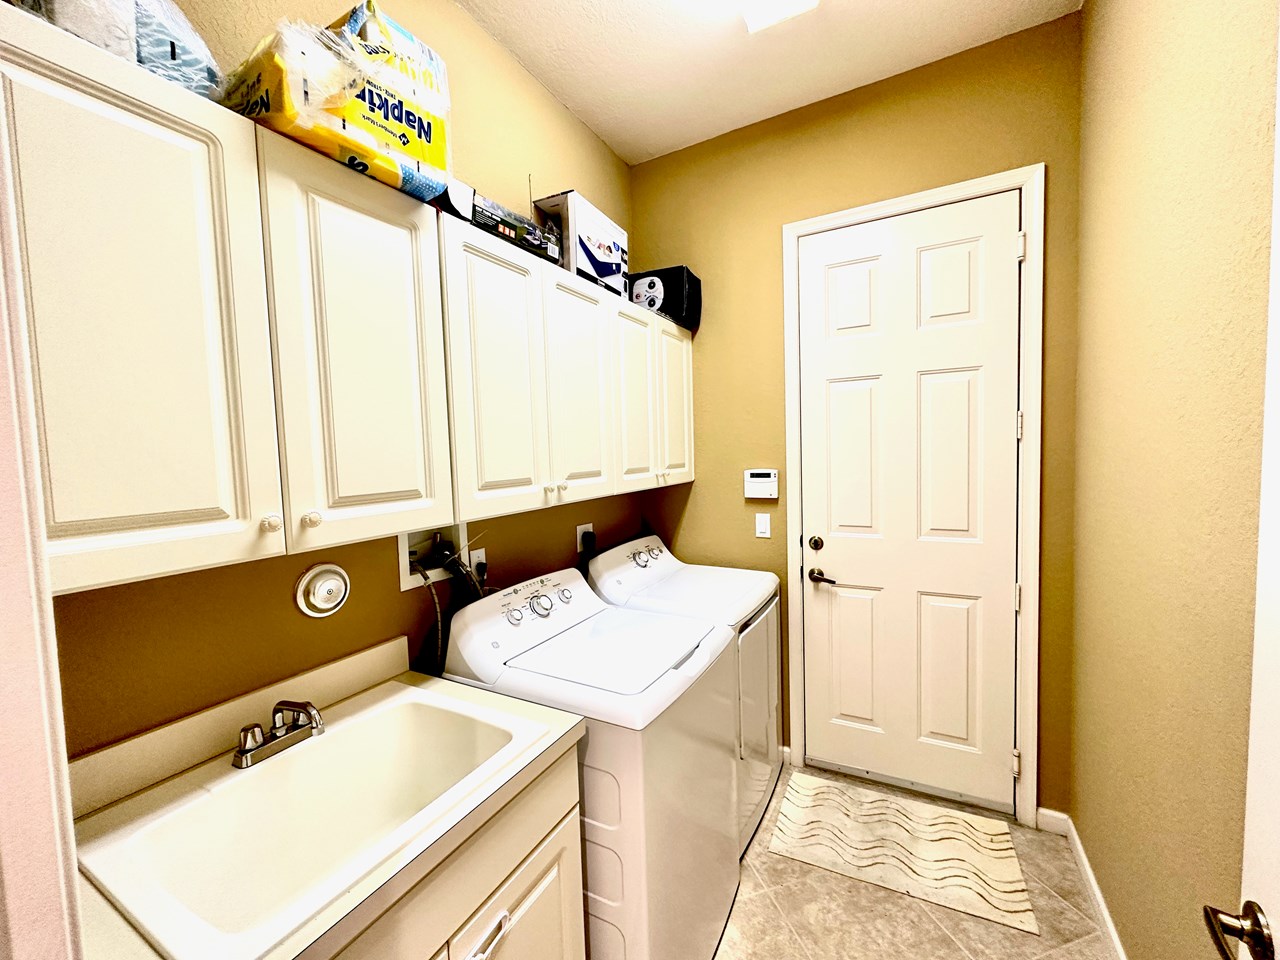 laundry room with utility sink, washer/dryer and cabinets